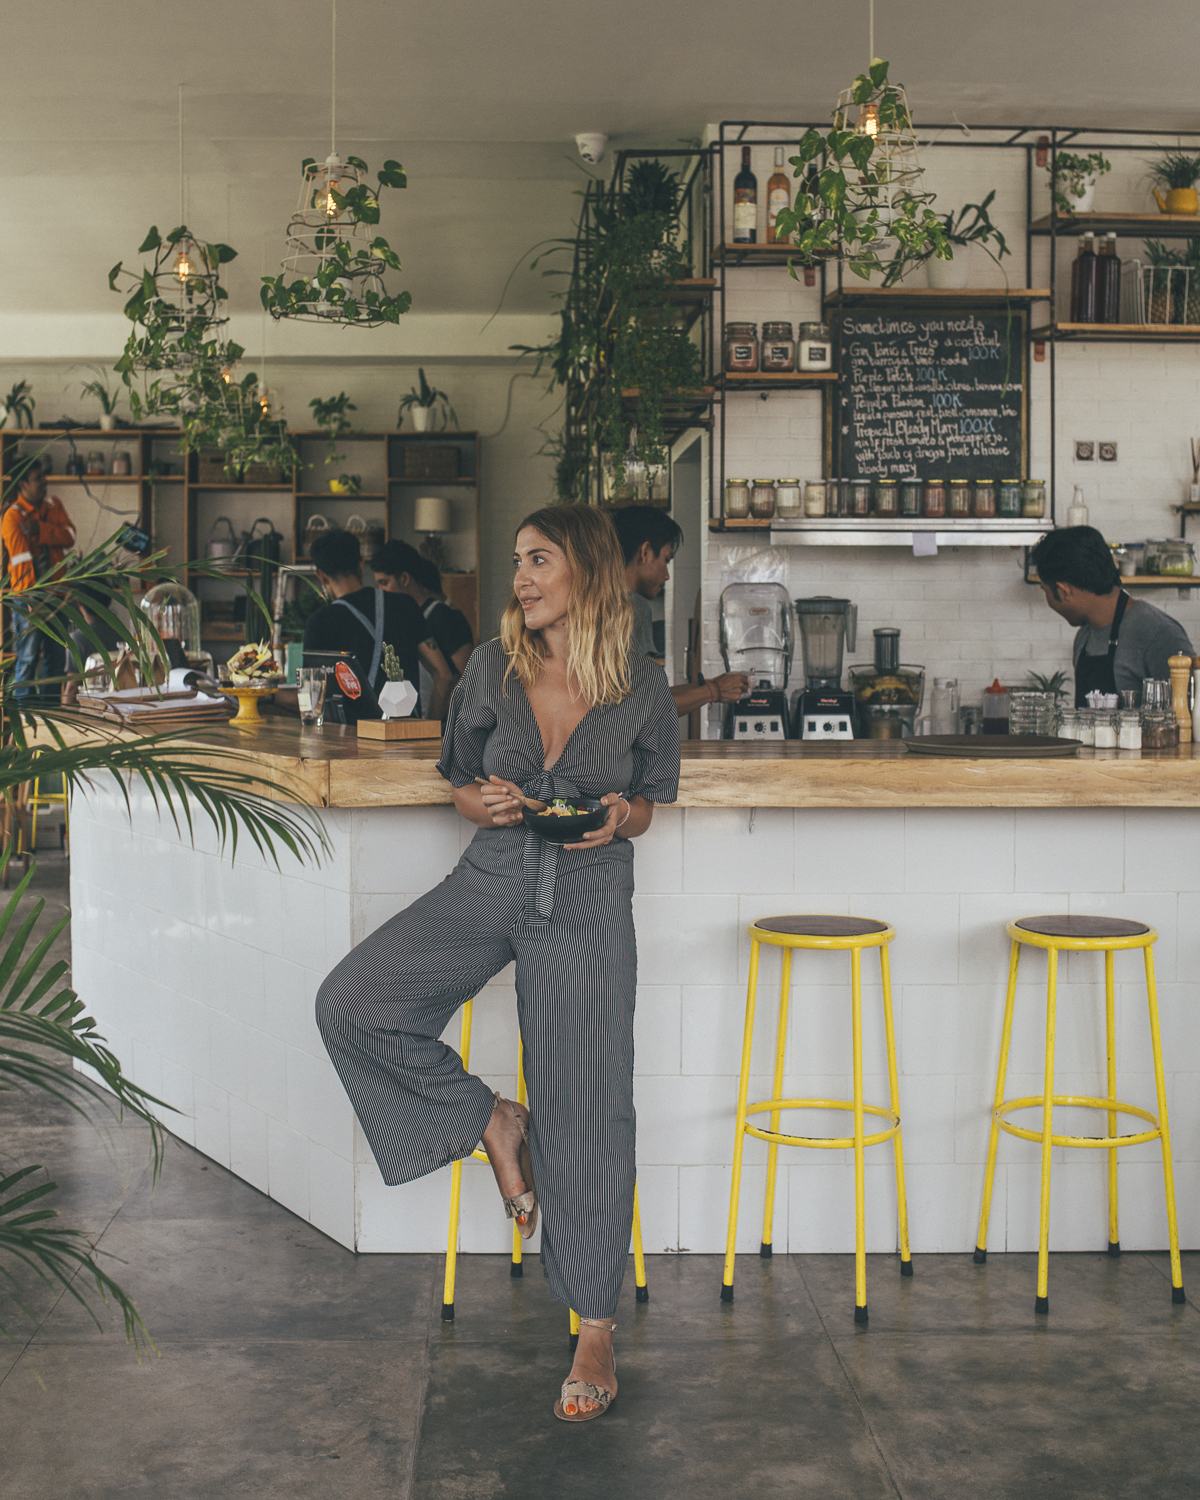 Two-Trees-Eatery_-2 My Instagrammable Bali Food Guide